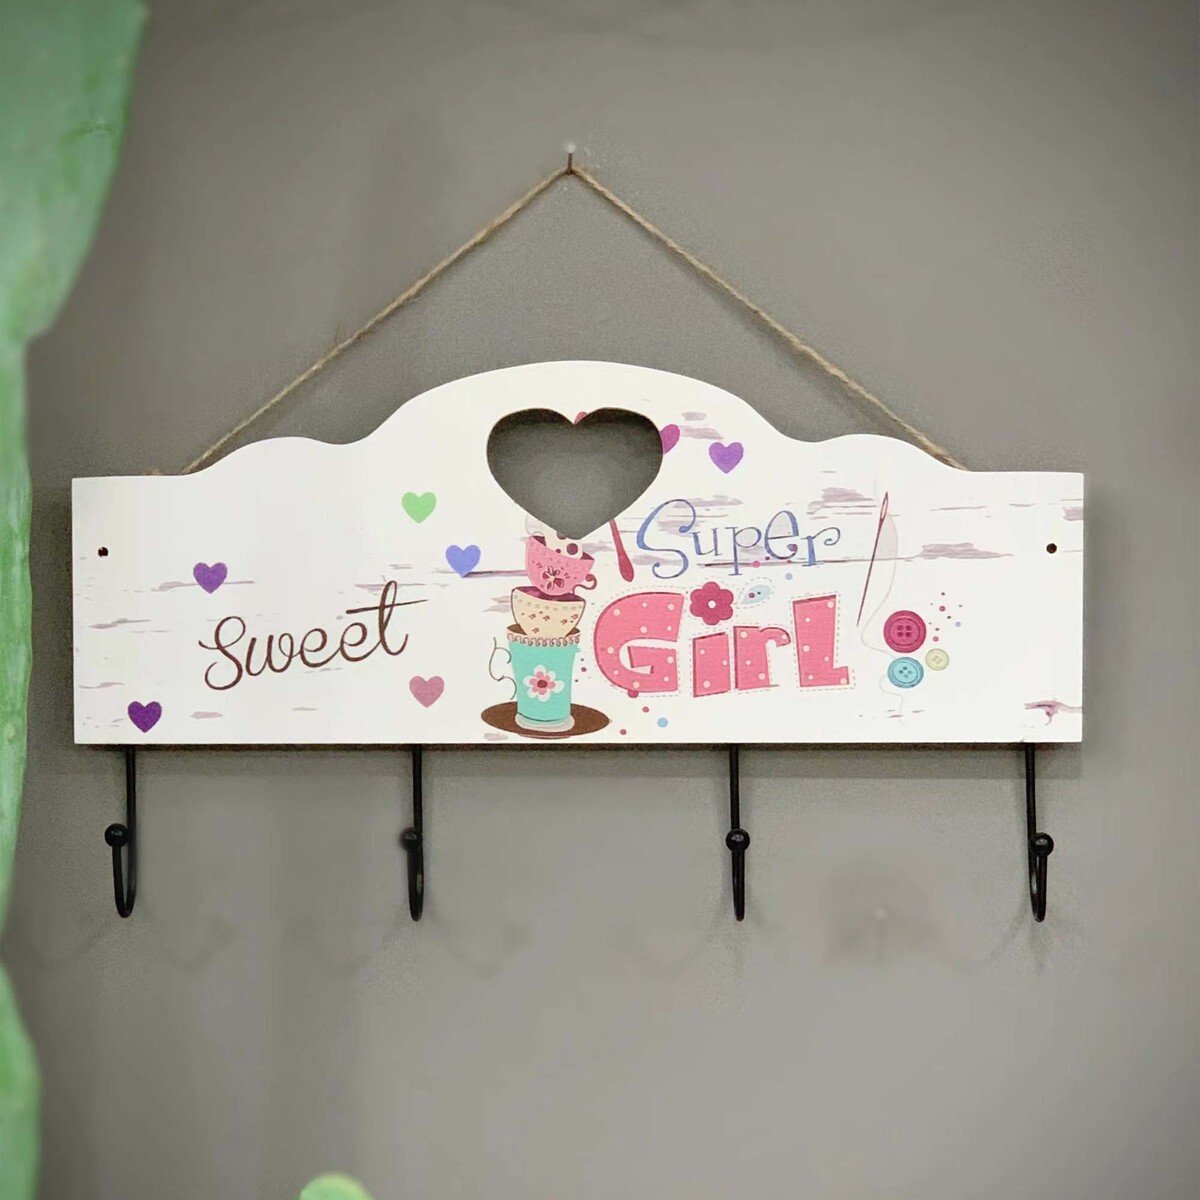 Maple Leaf Multifunction Wooden Wall Hook Hanger, Wall Mounted "Sweet Super Girl" Sign 4Key Hanging Hooks 40x22.5x5cm 20YX107